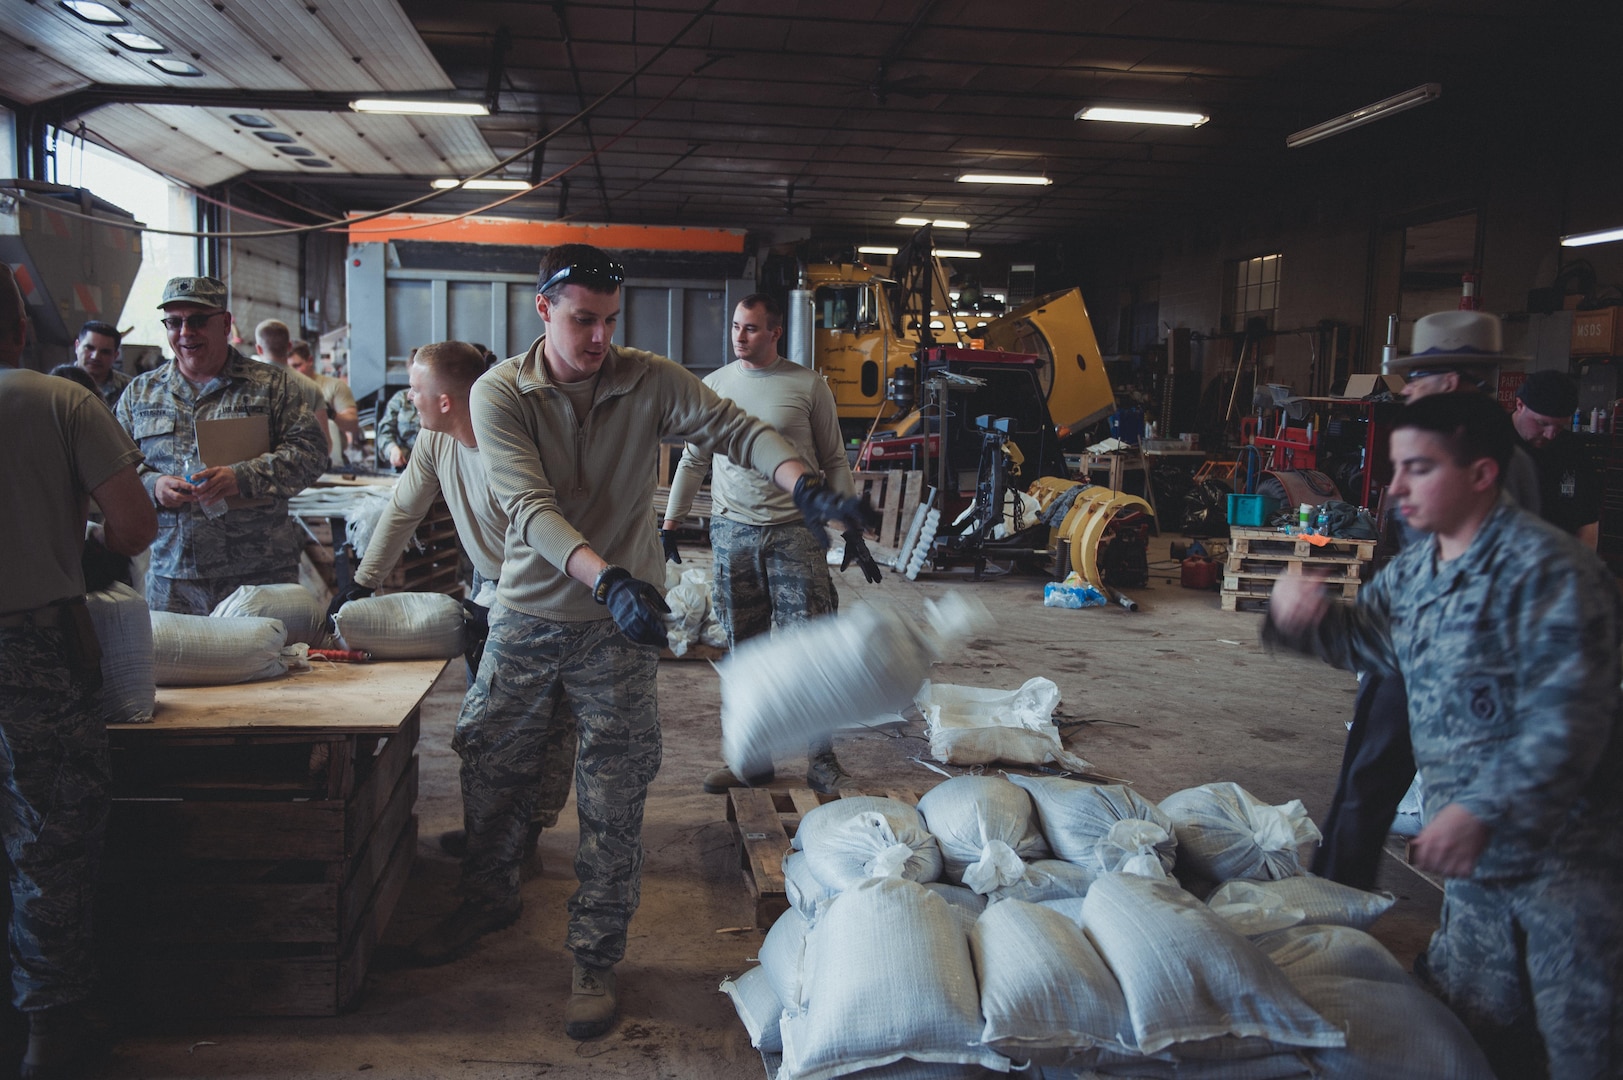 Airmen assigned to the 107th Attack Wing of the New York Air National Guard fill sandbags at the Kendall, N. Y. town garage on May 11, 2017, as part of the New York National Guard response to high water levels in Lake Ontario which resulted in local flooding. Between May 3 and May 13, 323 New York National Guard Soldiers and Airmen filled 239, 239,703 sandbags at six locations in counties along the lake. 